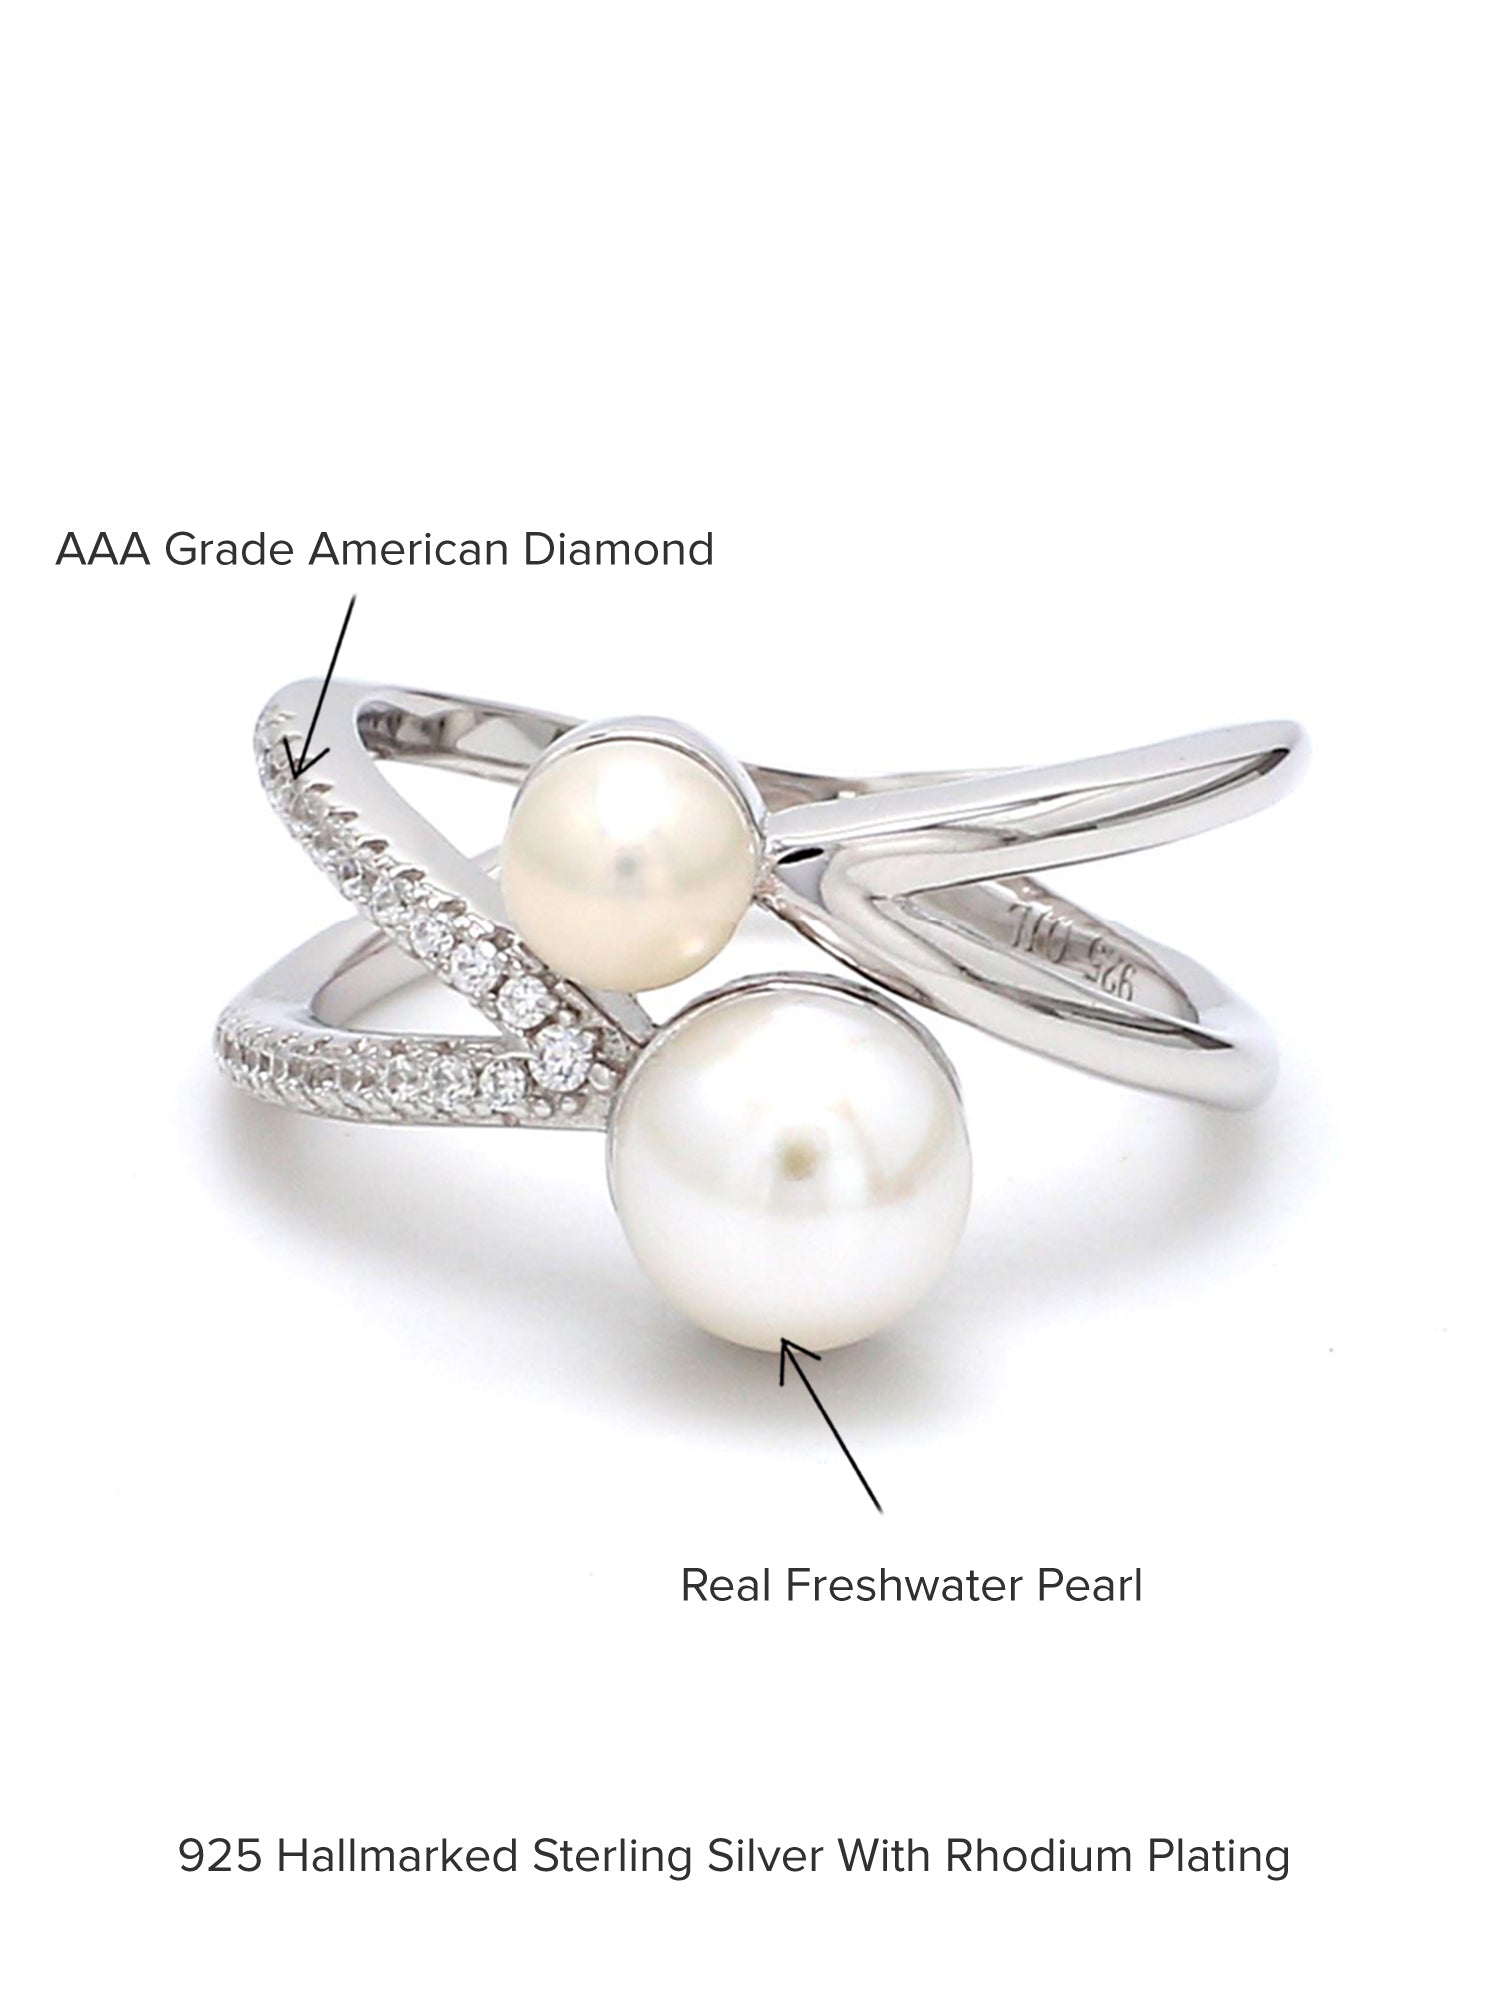 TWO PEARL CROSSOVER SILVER RING